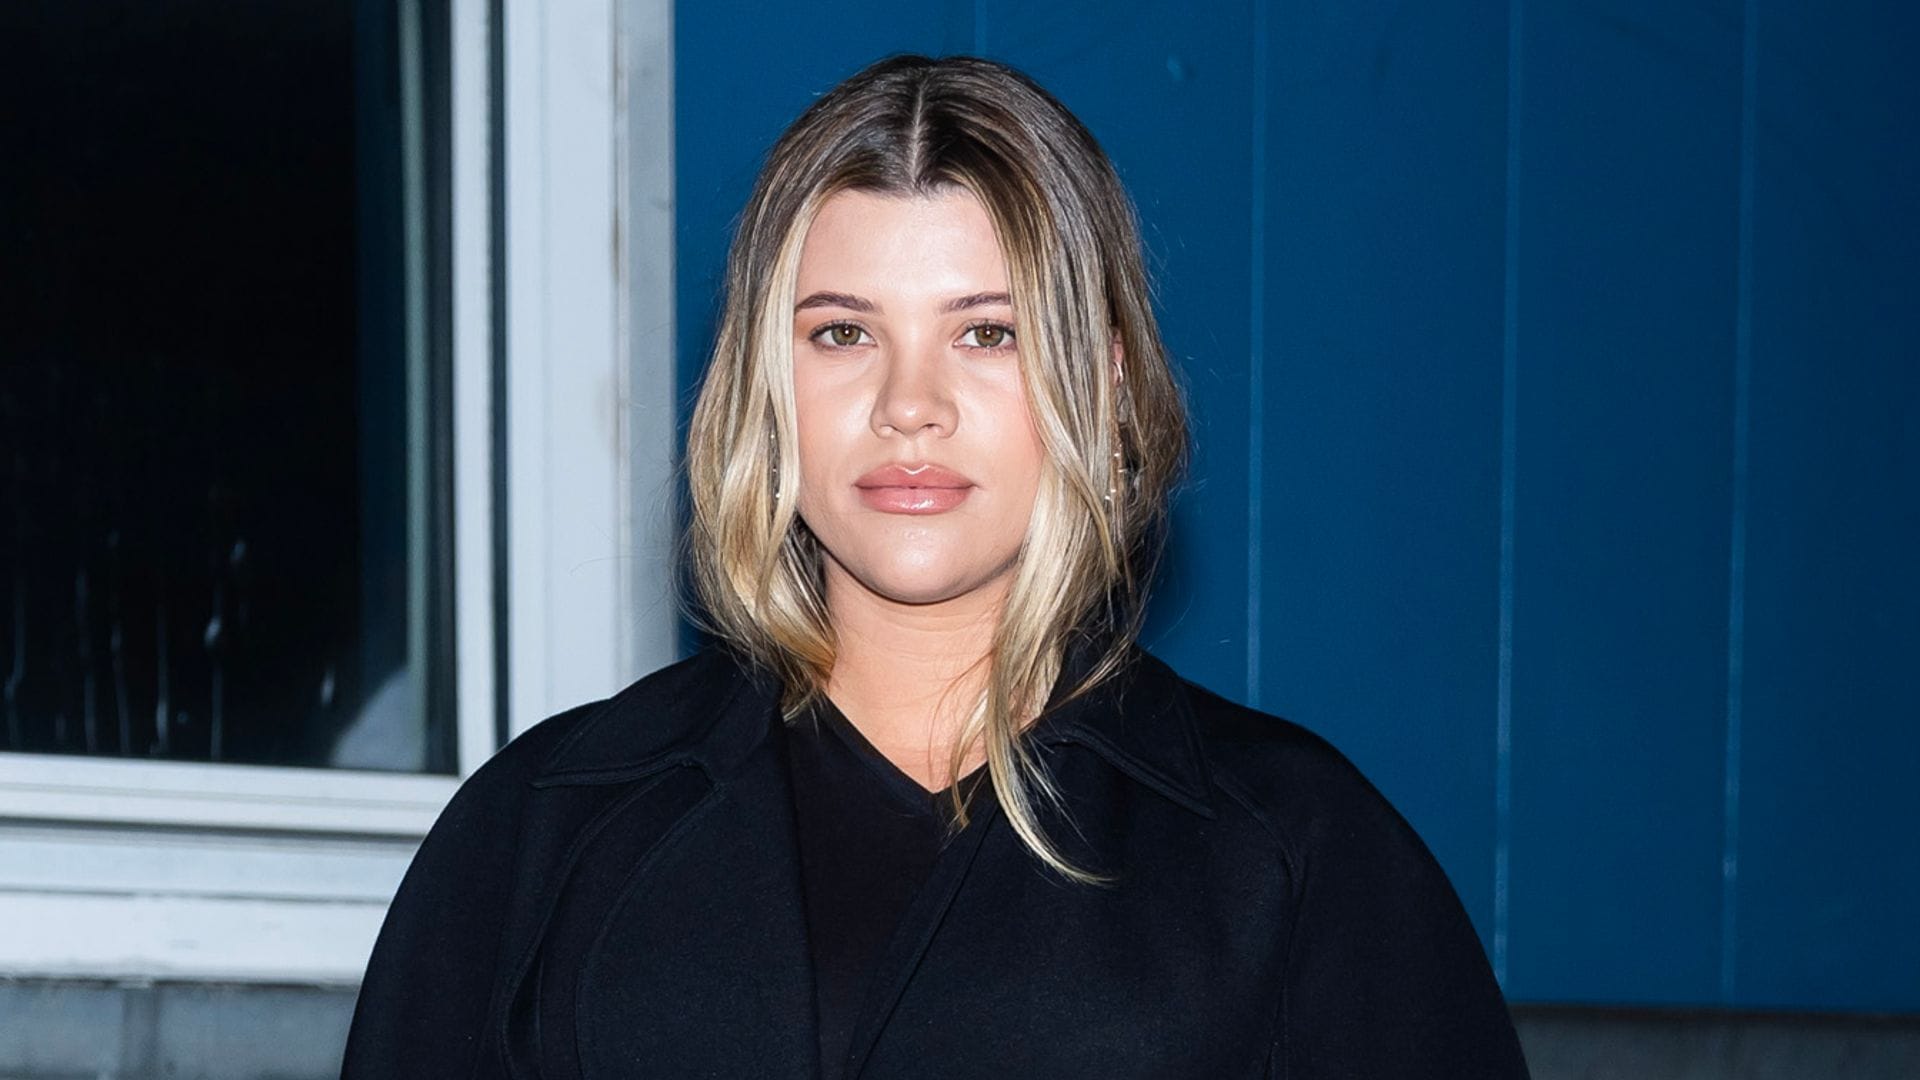 Sofia Richie shares rare photos of her two-month-old daughter Eloise